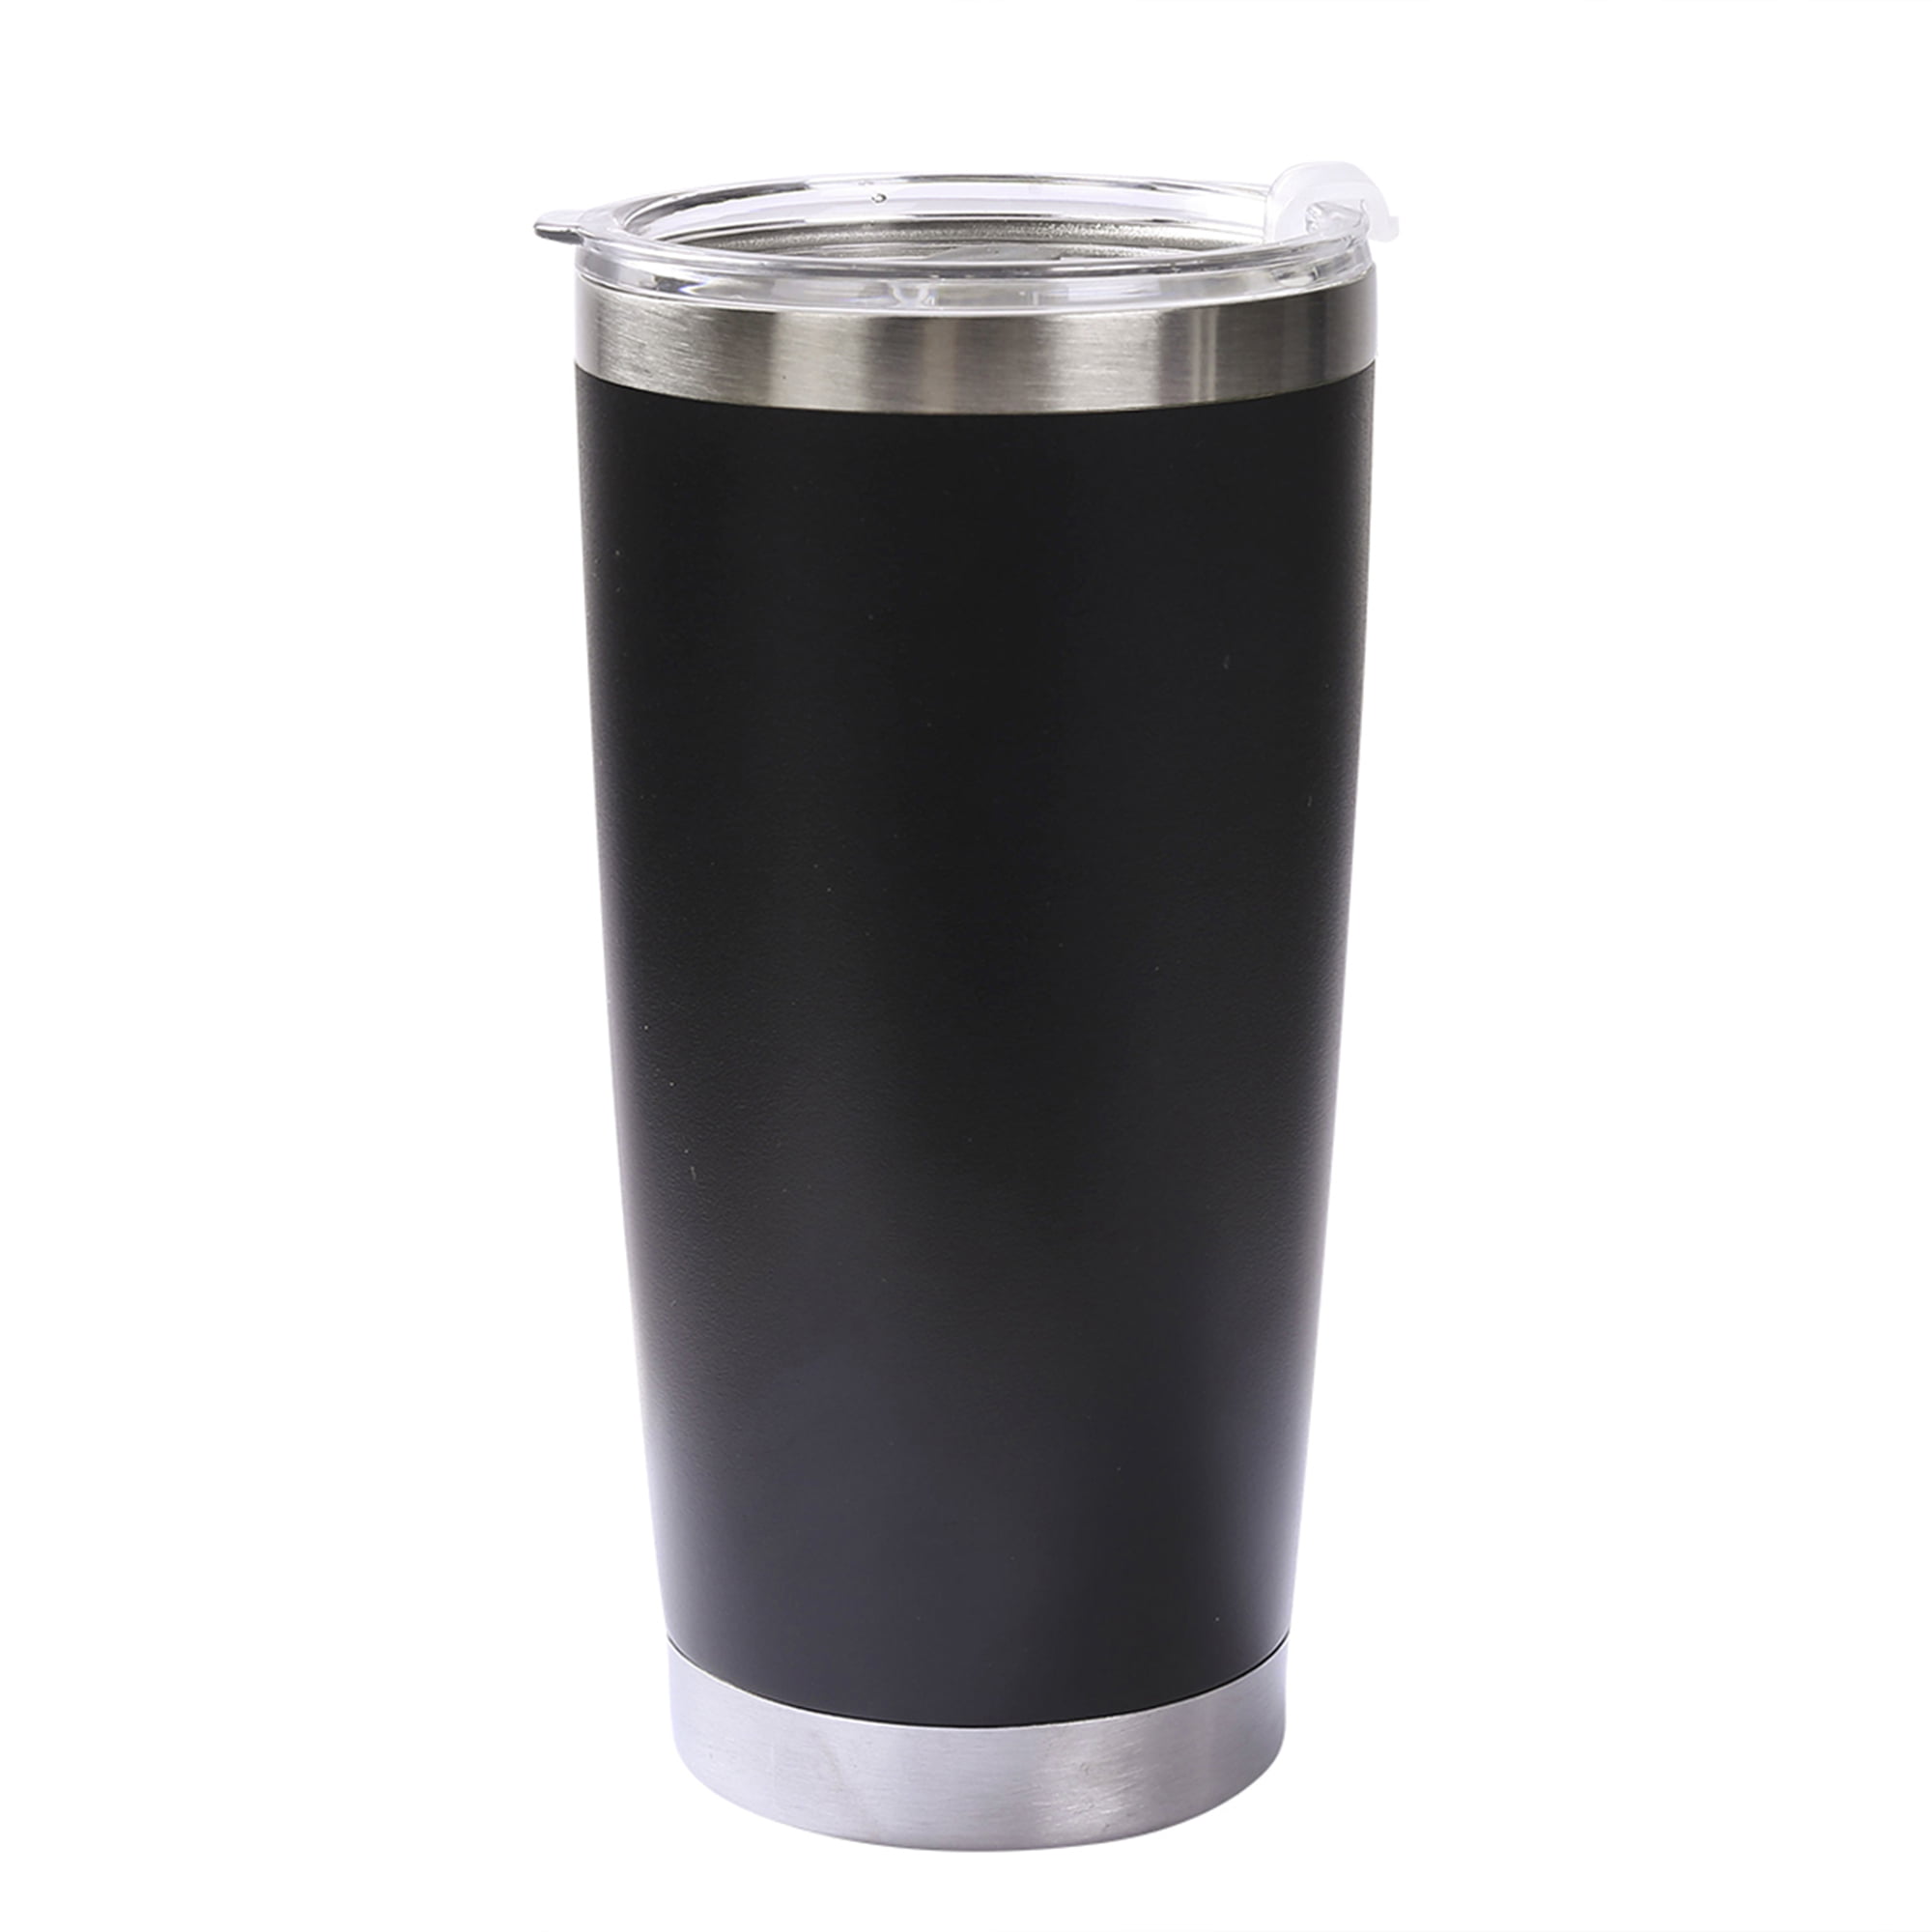 IamTunneyW on X: DÈCOR 650ml Extra Large Double Wall Smoothie & Coffee  Tumbler 20-hour hot 10-hour cold rating #bariatricbabes #bariatricsleeve  #gastricsleevesurgery #rissarecharged #sleevedlife  #verticalsleevegastrectomy #vsginstacrew #vsglife